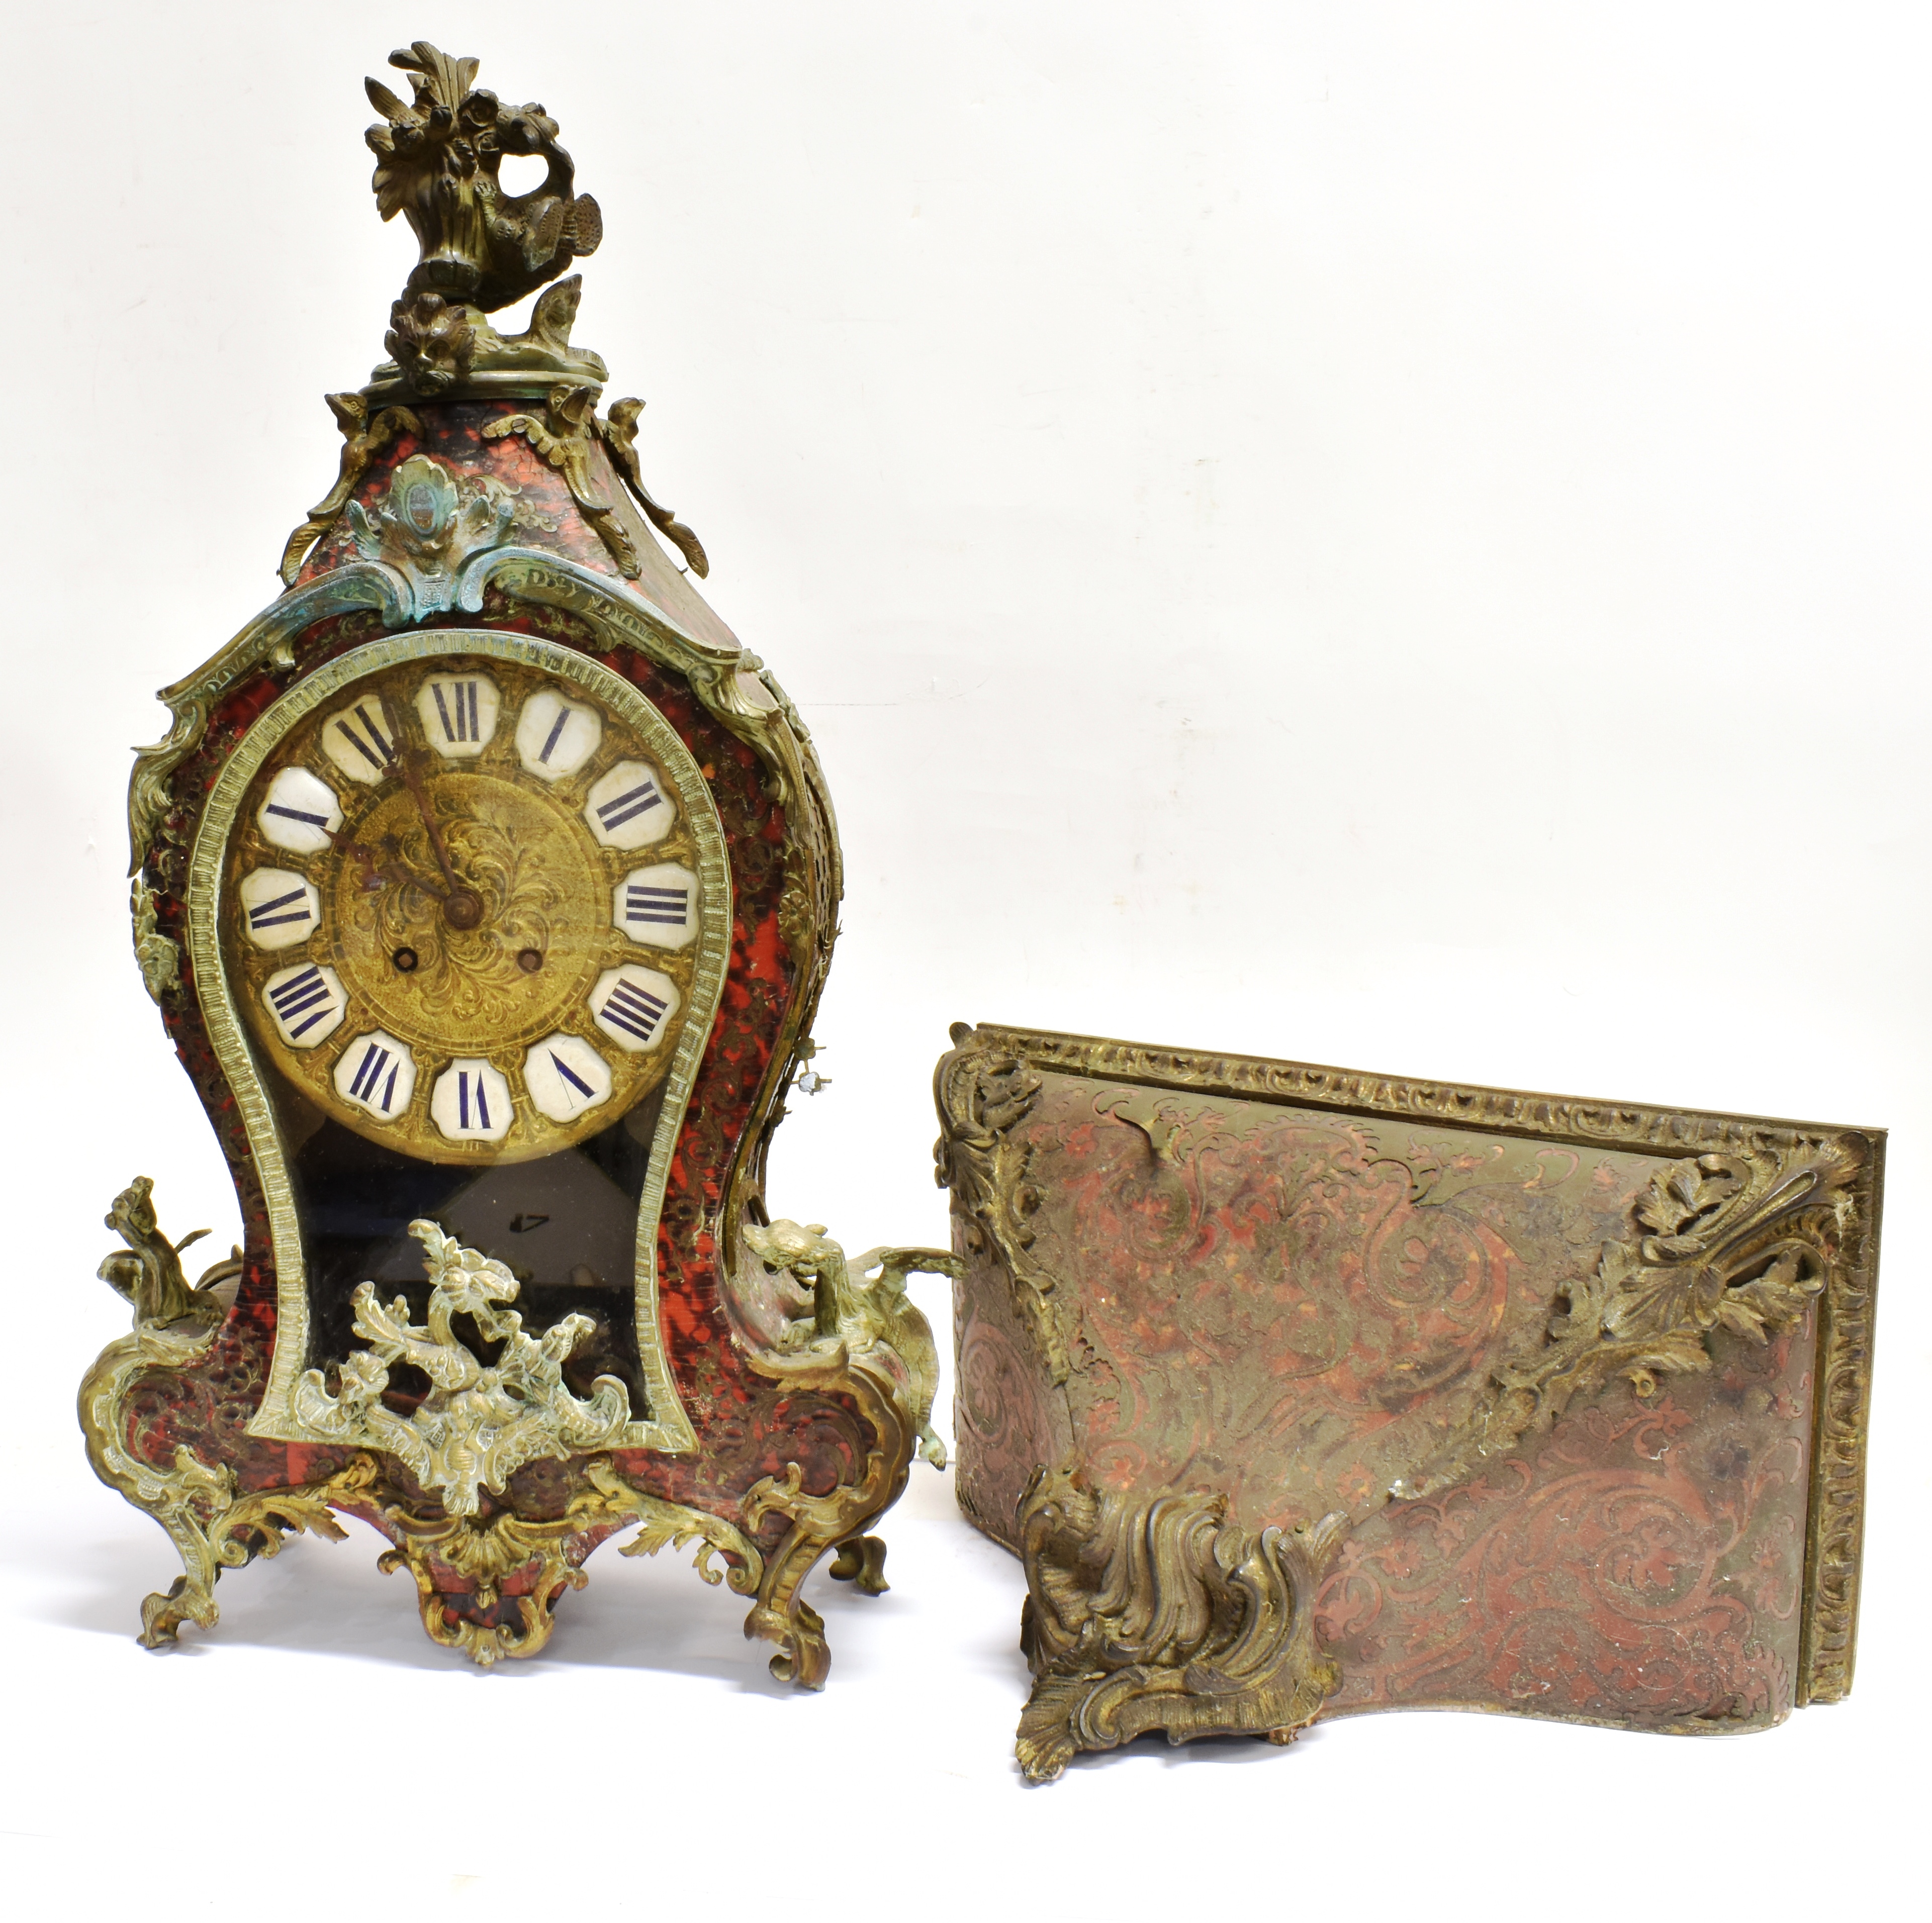 A LARGE 19TH CENTURY FRENCH GILT METAL MOUNTED BOULLE BRACKET CLOCK with Roman numeral enamel